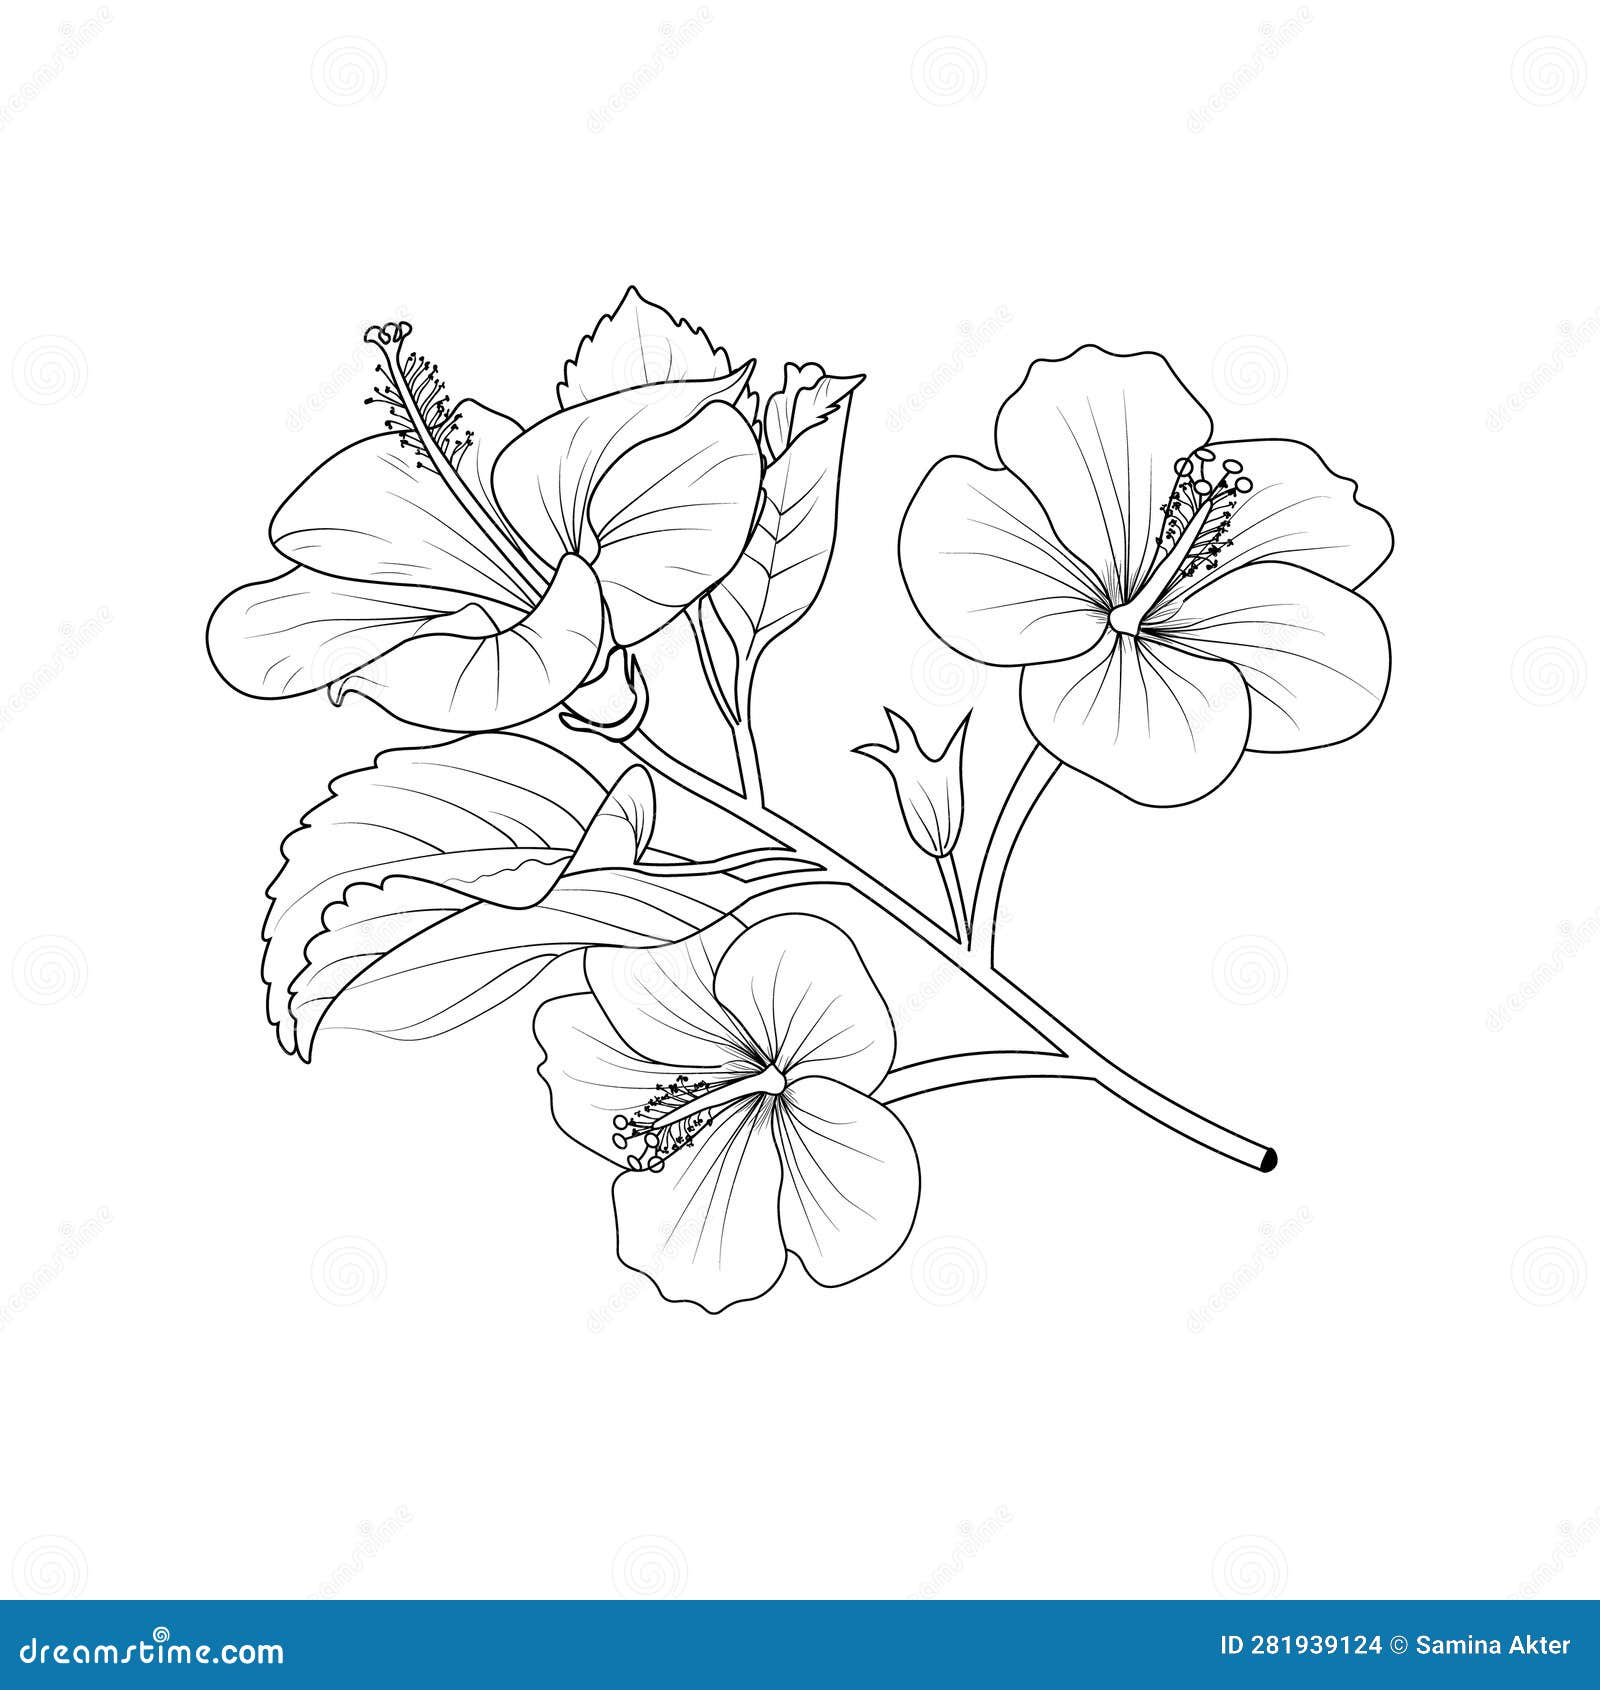 Simple Lily Bouquet Drawing Lily Flower Pencil Art Lily Flower Outline  Drawing Lily Flower Pattern Designs Pencil Drawing Lilys Simple Lily Flower  Drawing For Kids Lily Flower Coloring Page For Children Lily